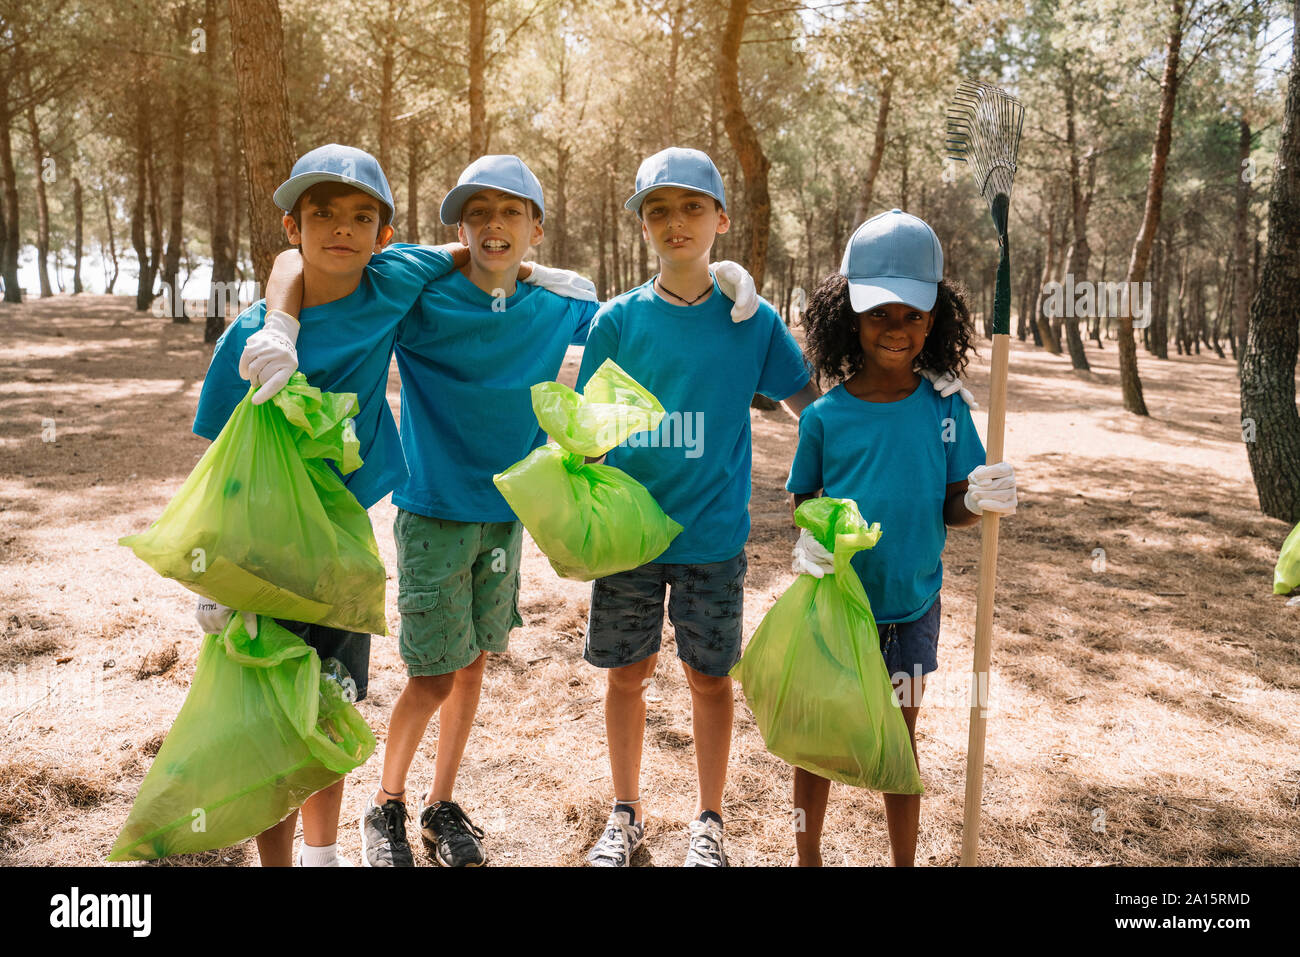 Group portrait of volunteering children collecting garbage in a park Stock Photo